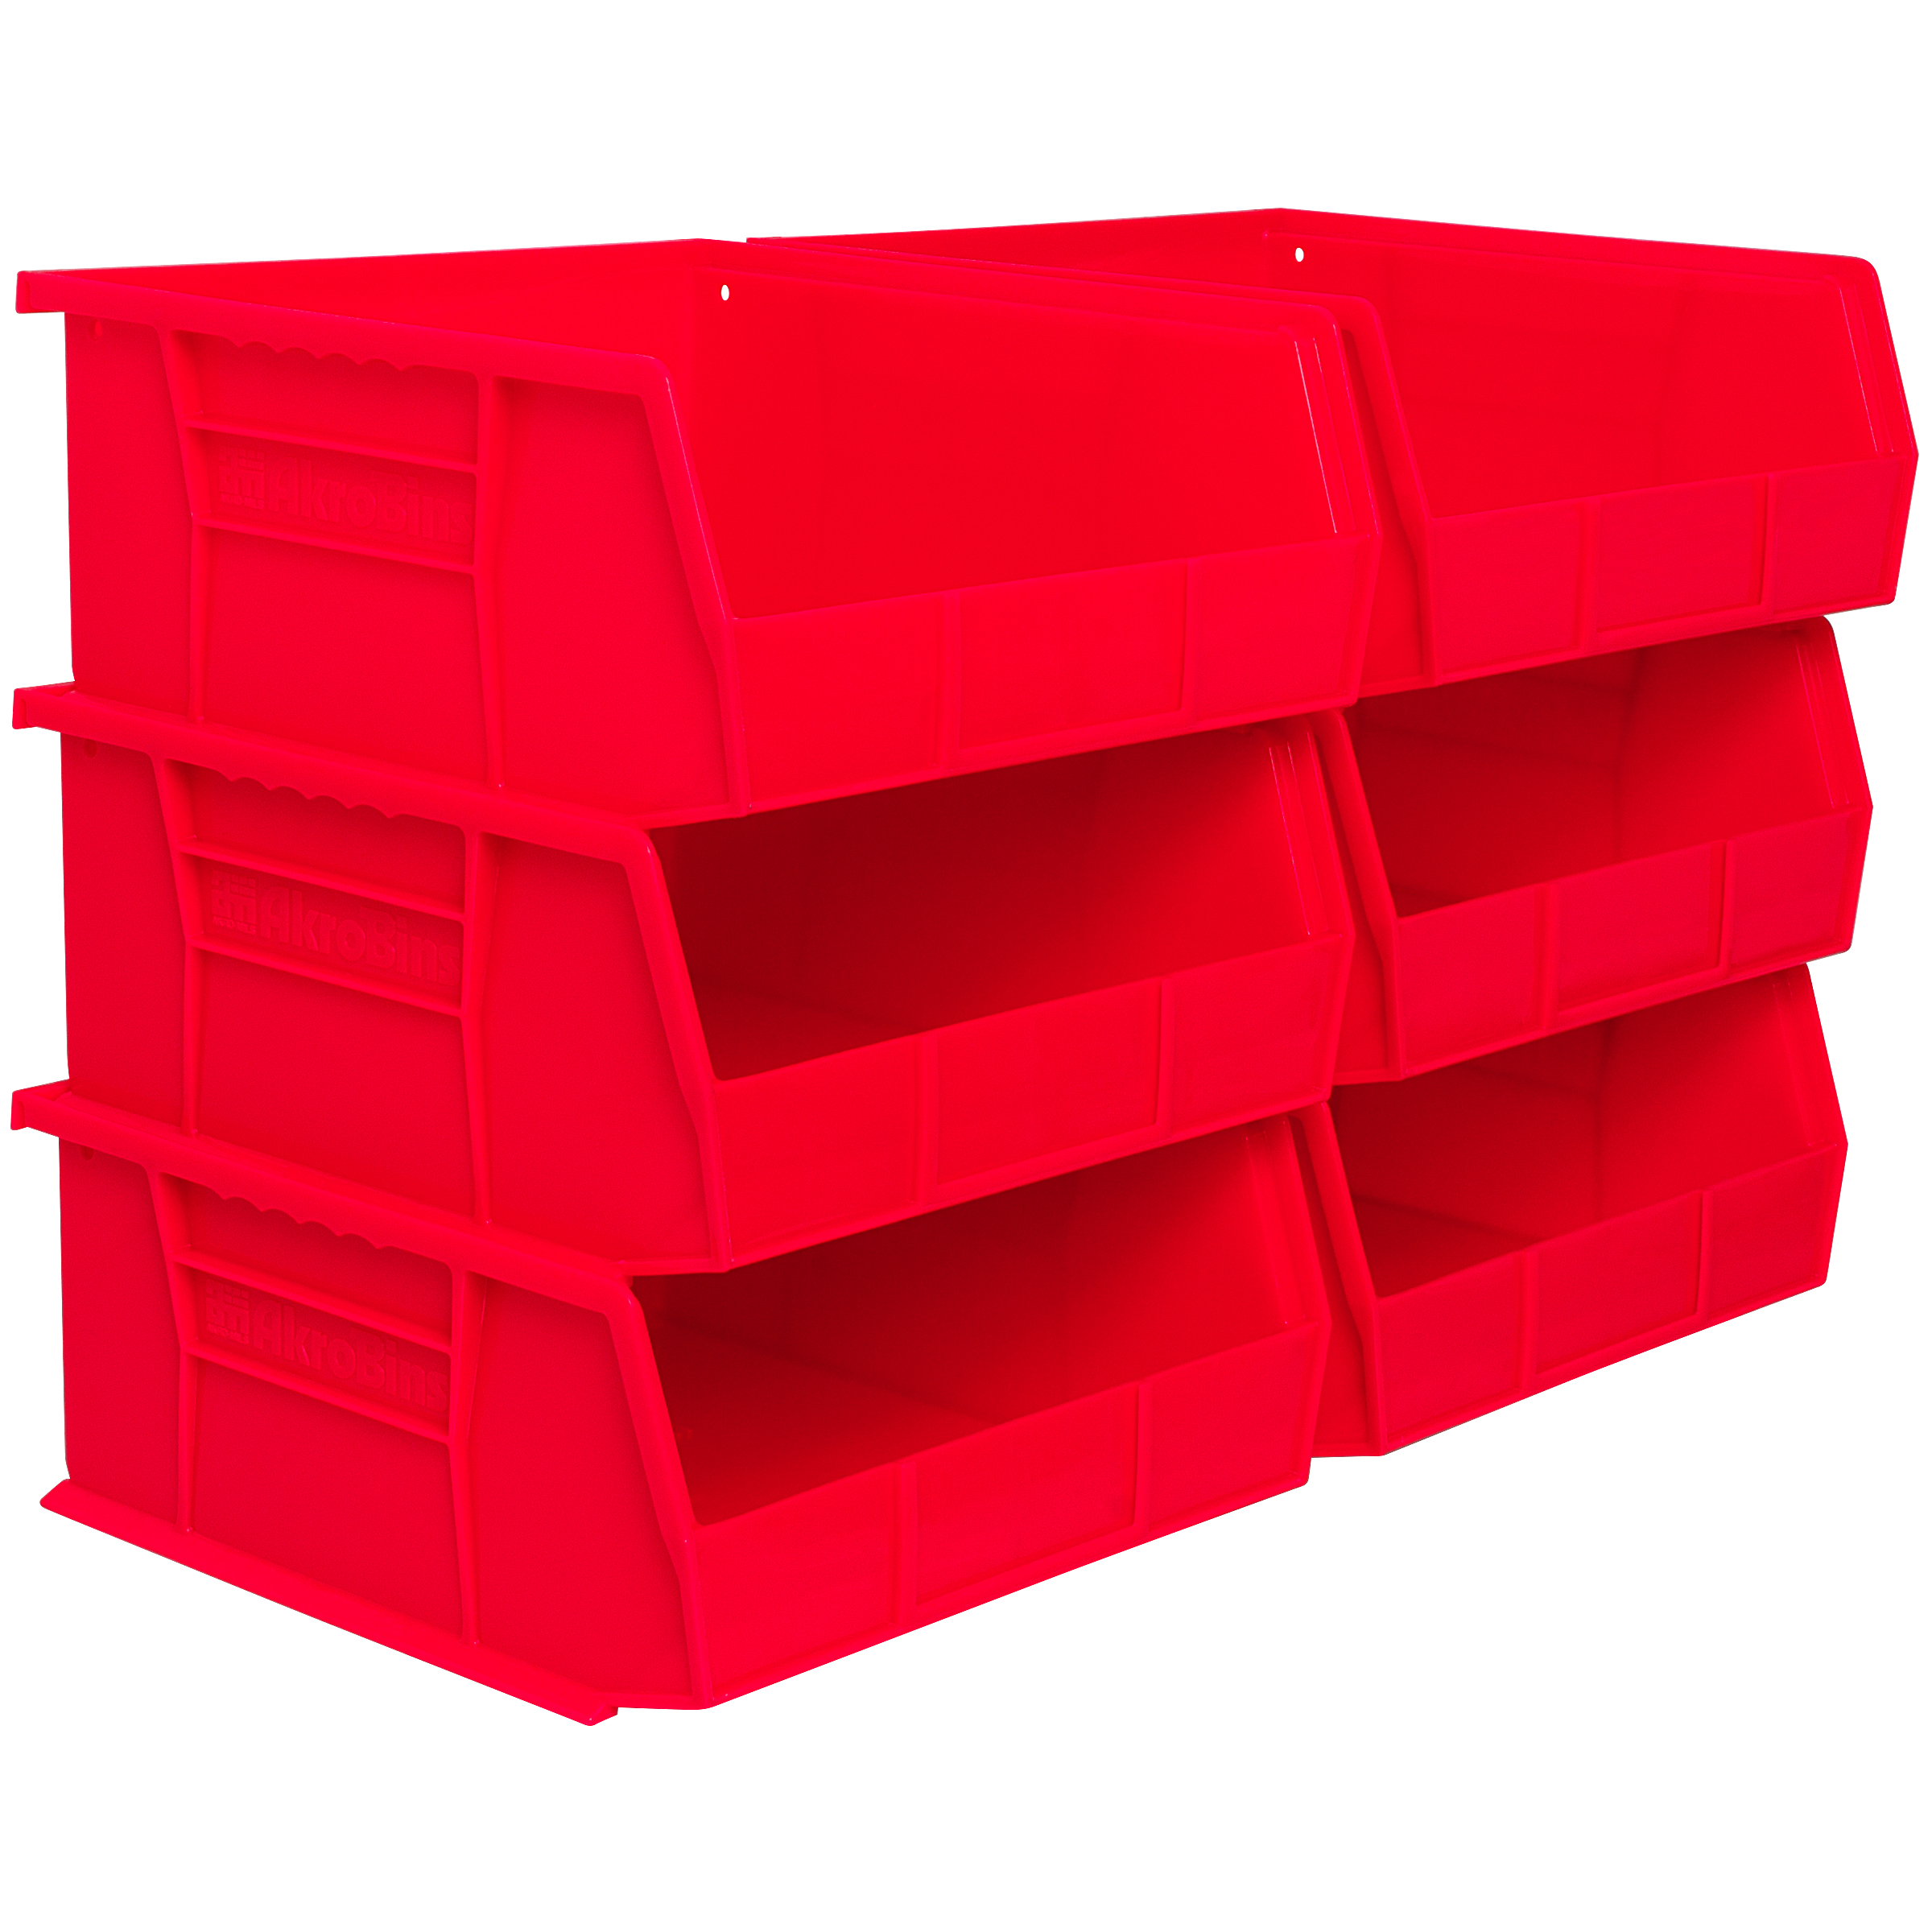 Stacking Plastic Storage Bin Container Set of 6 Akro-Mils 30235 AkroBins, Red - image 1 of 12